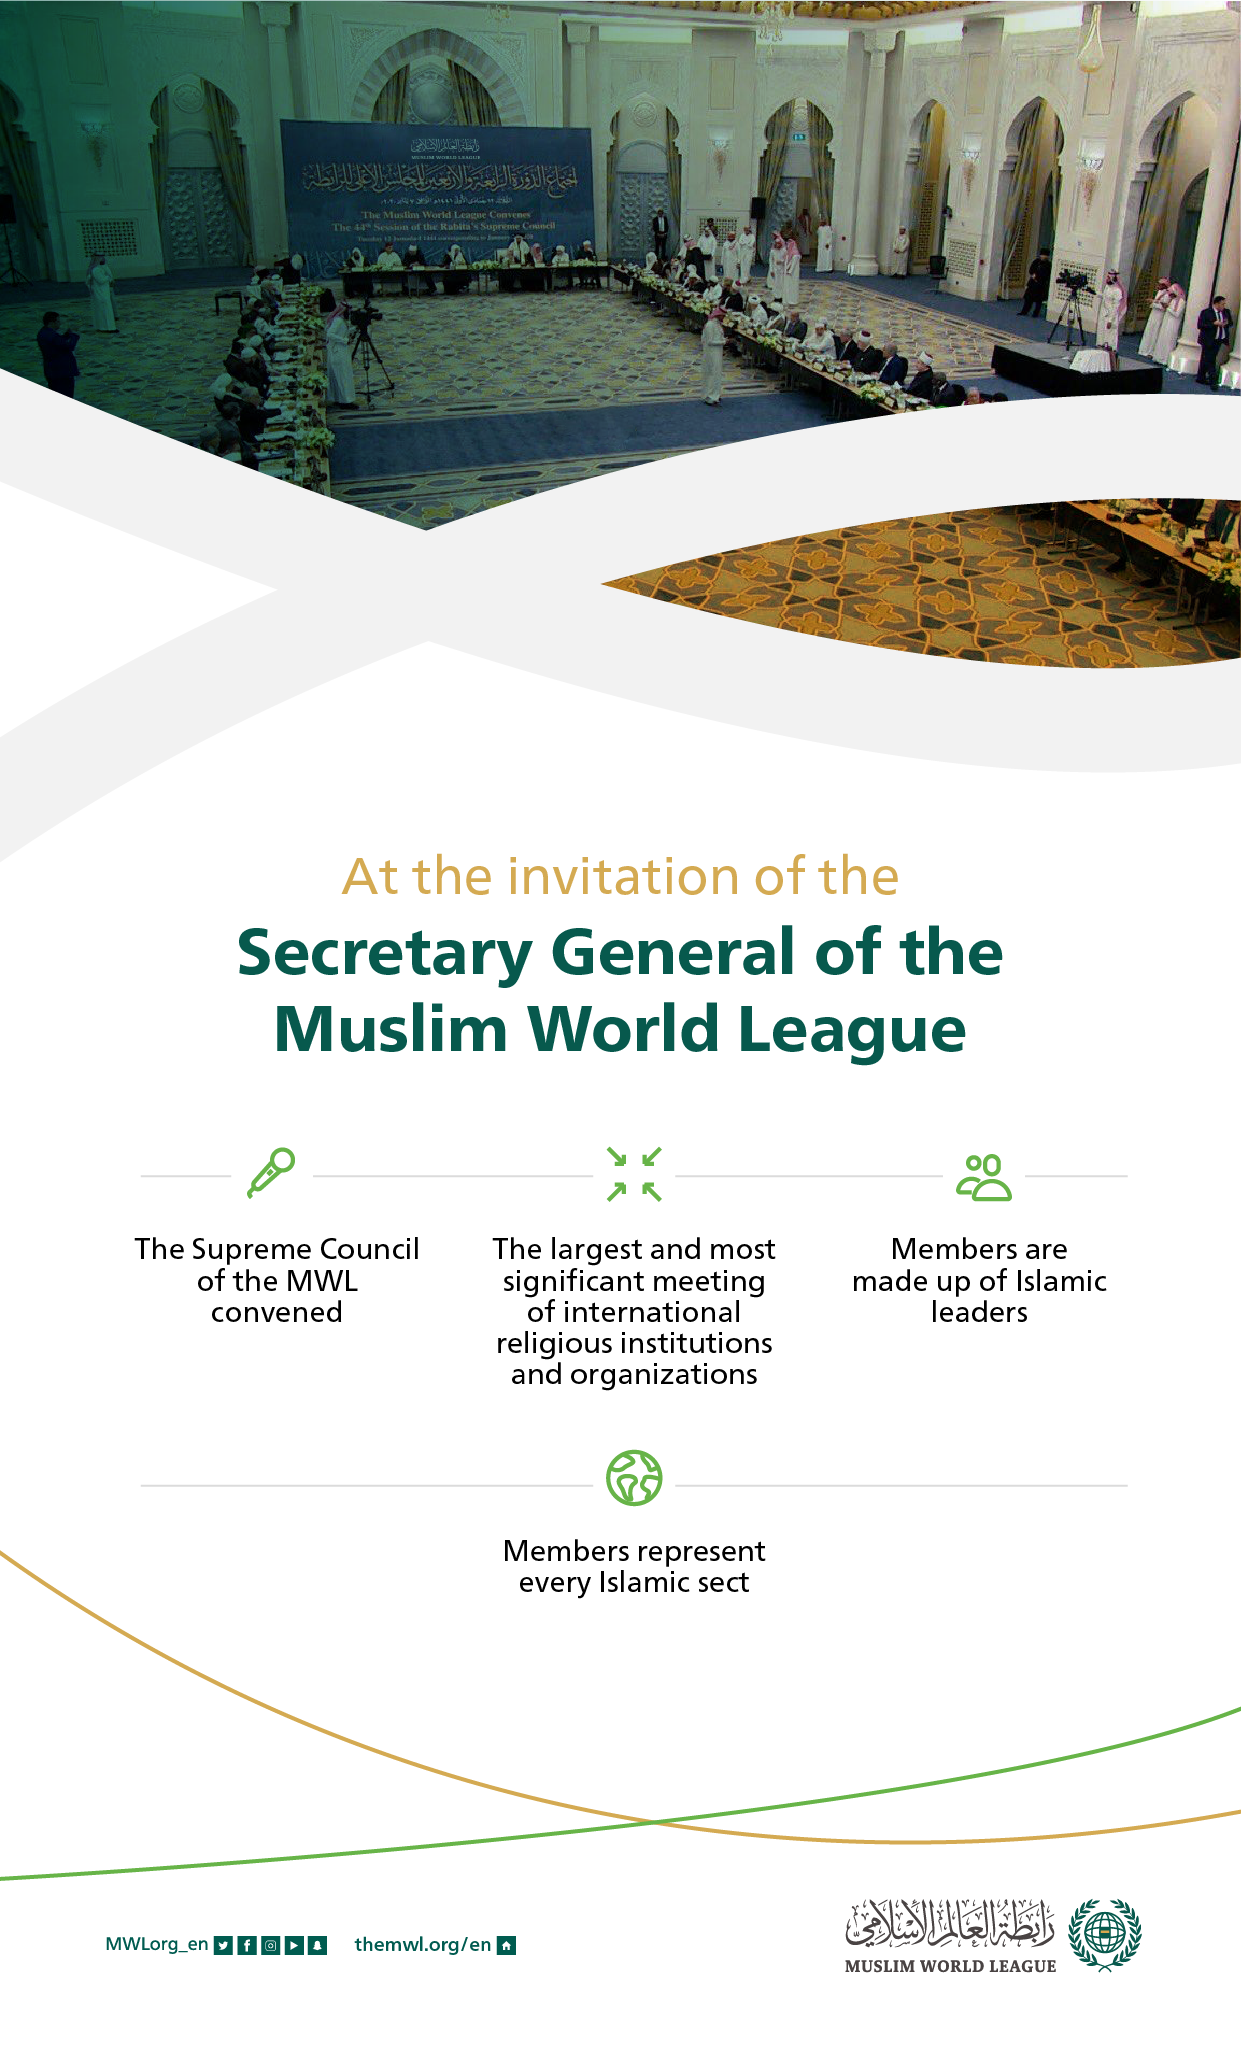 The Supreme Council of the Muslim World League is one of the top councils of international religious institutions and organizations whose members are a group of Islamic leaders: